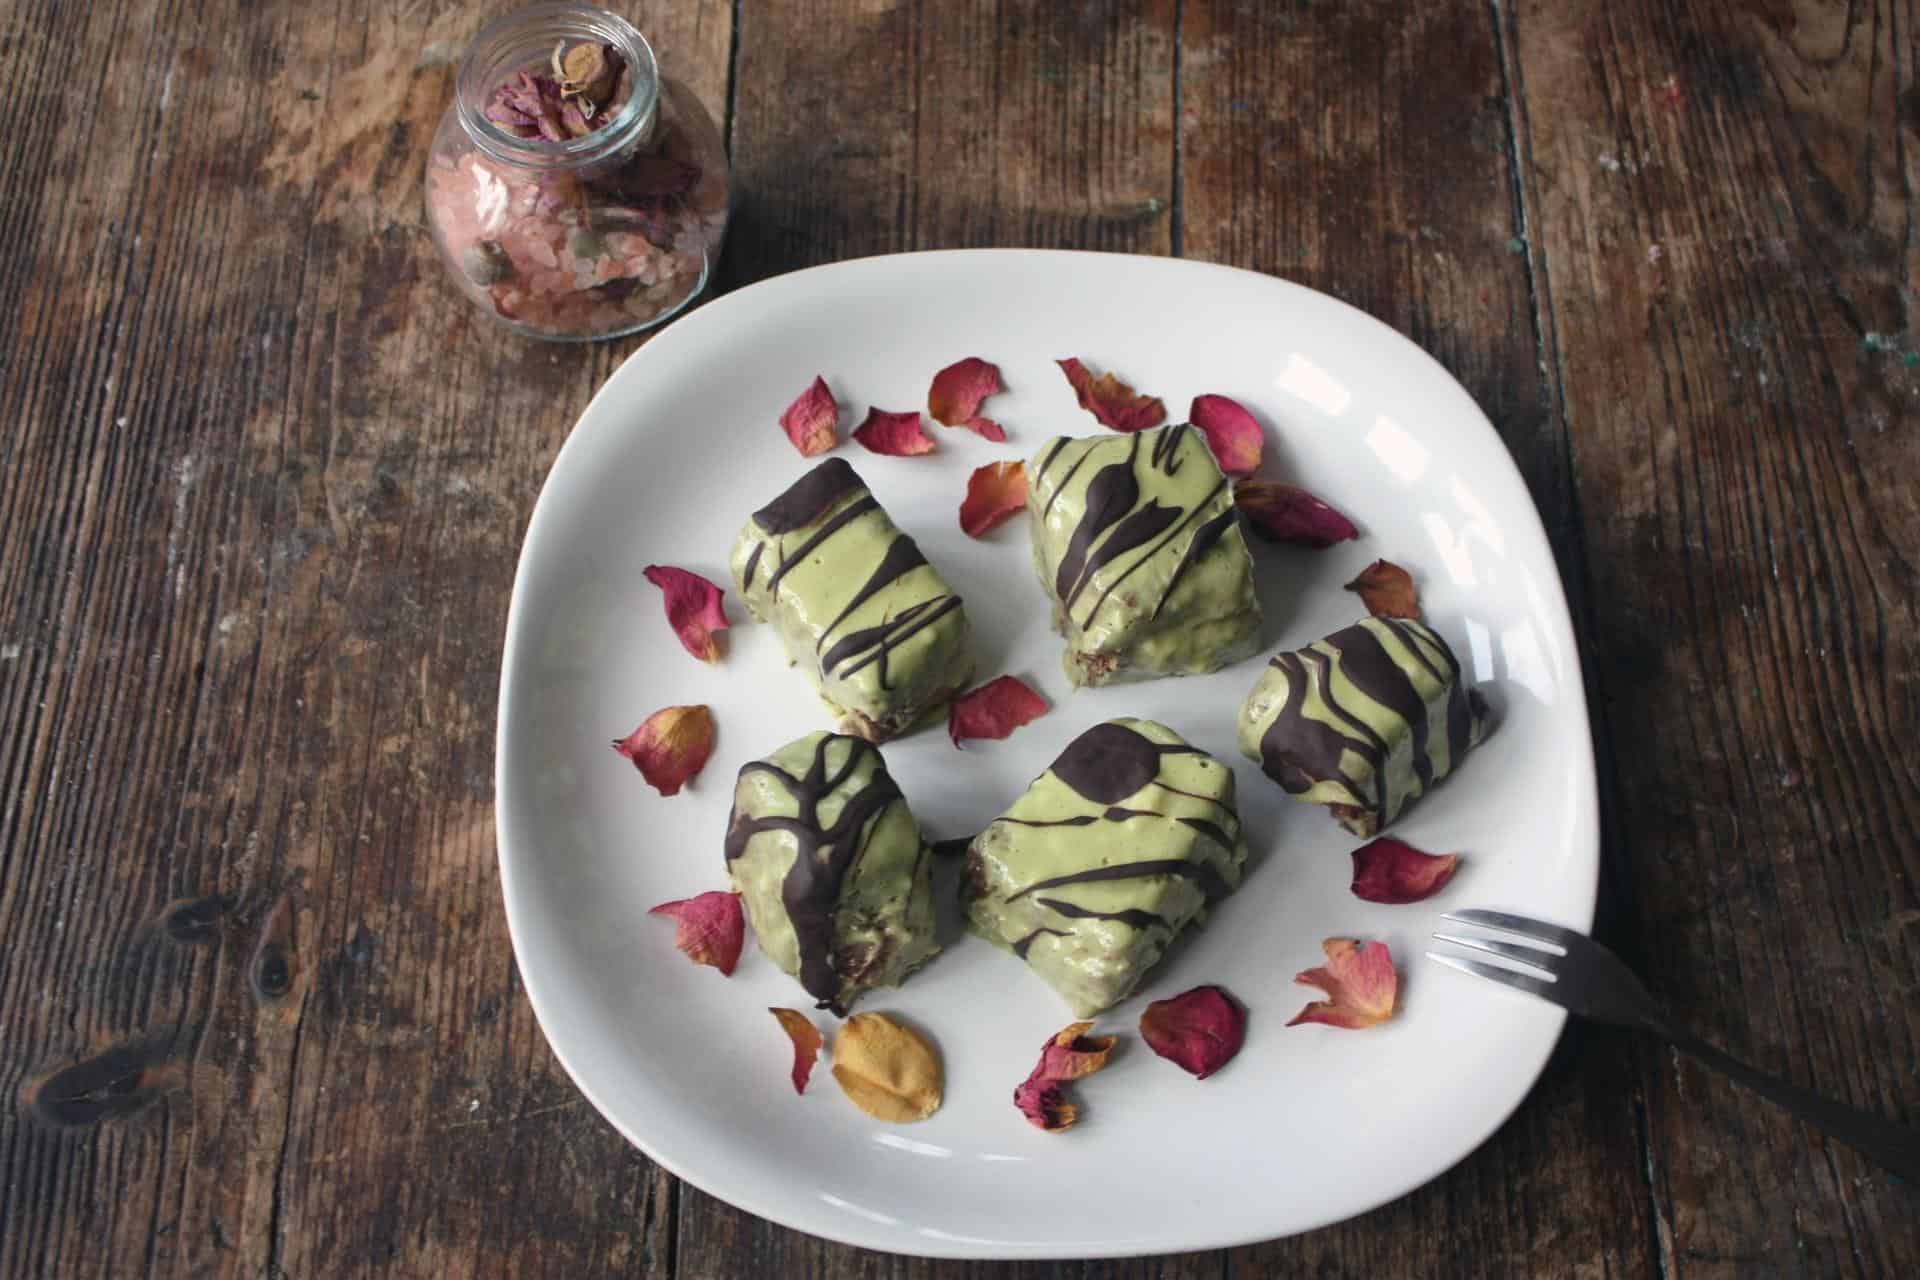 Plate containing five fondant fancies with green icing and drizzled in chocolate, sprinkled with rose petals